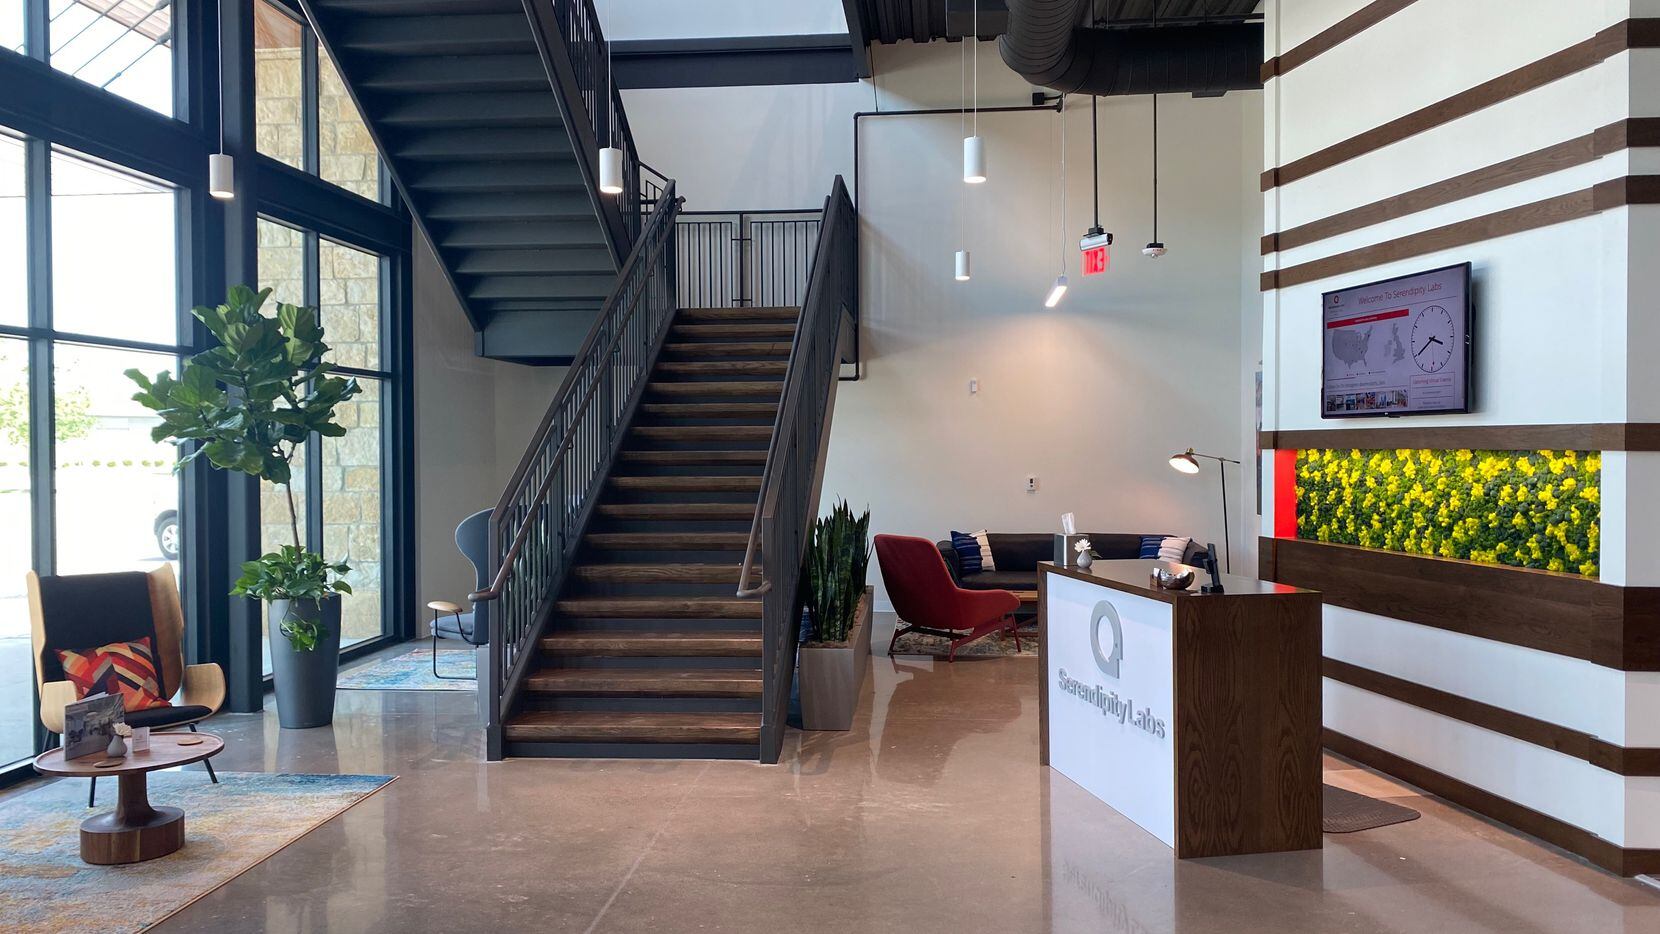 Aiden Technologies' new headquarters will move to this co-working space in McKinney.